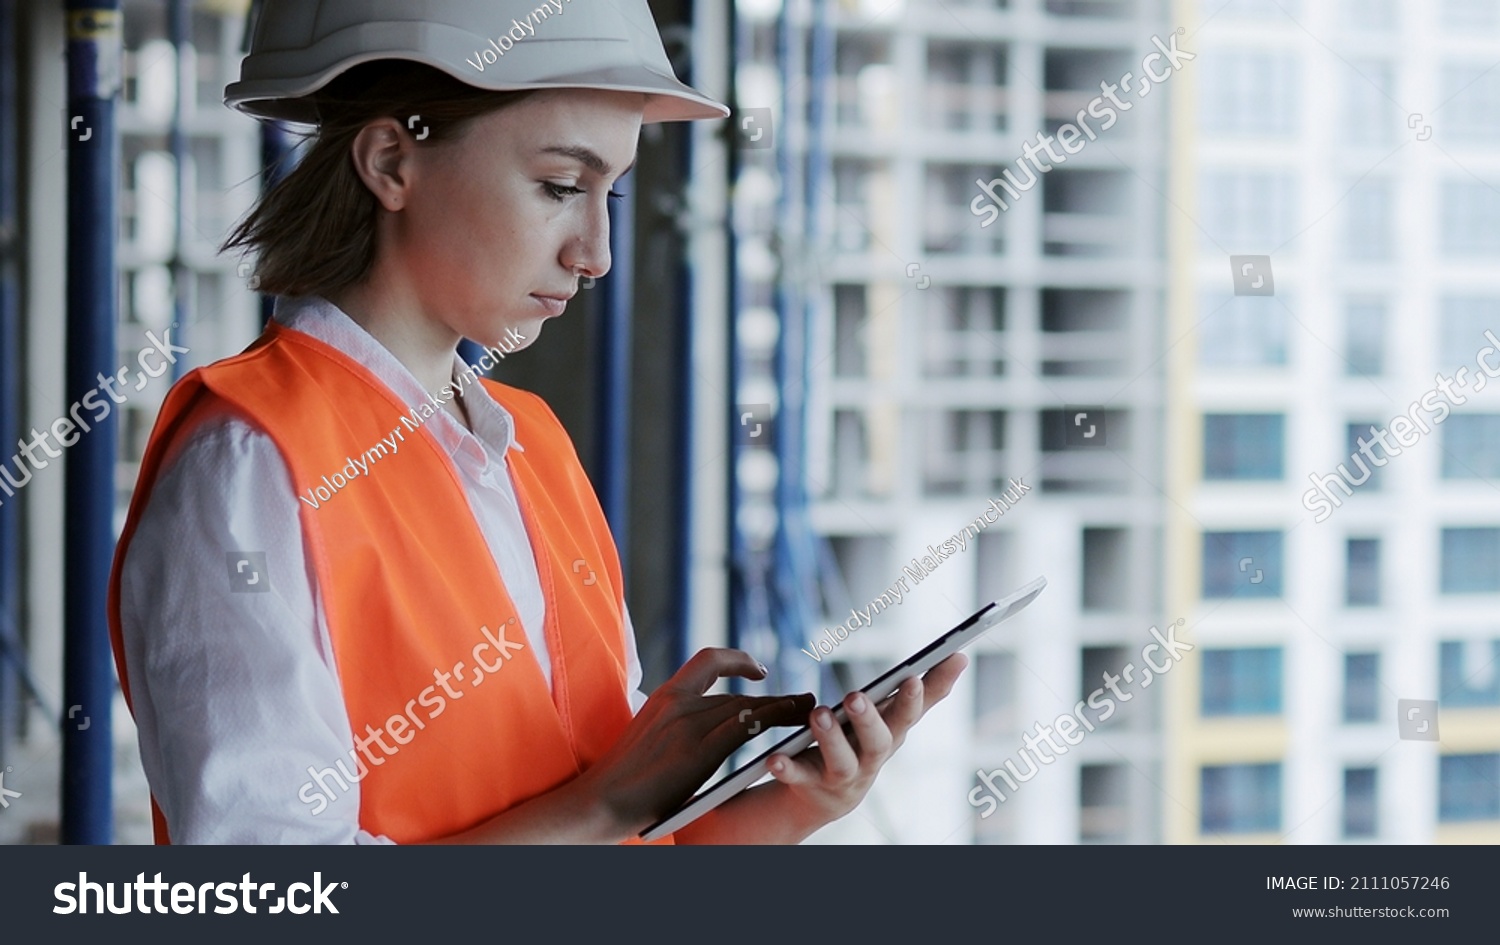 Construction concept of Engineer or Architect working at Construction Site. A woman with a tablet at a construction site. Bureau of Architecture. #2111057246